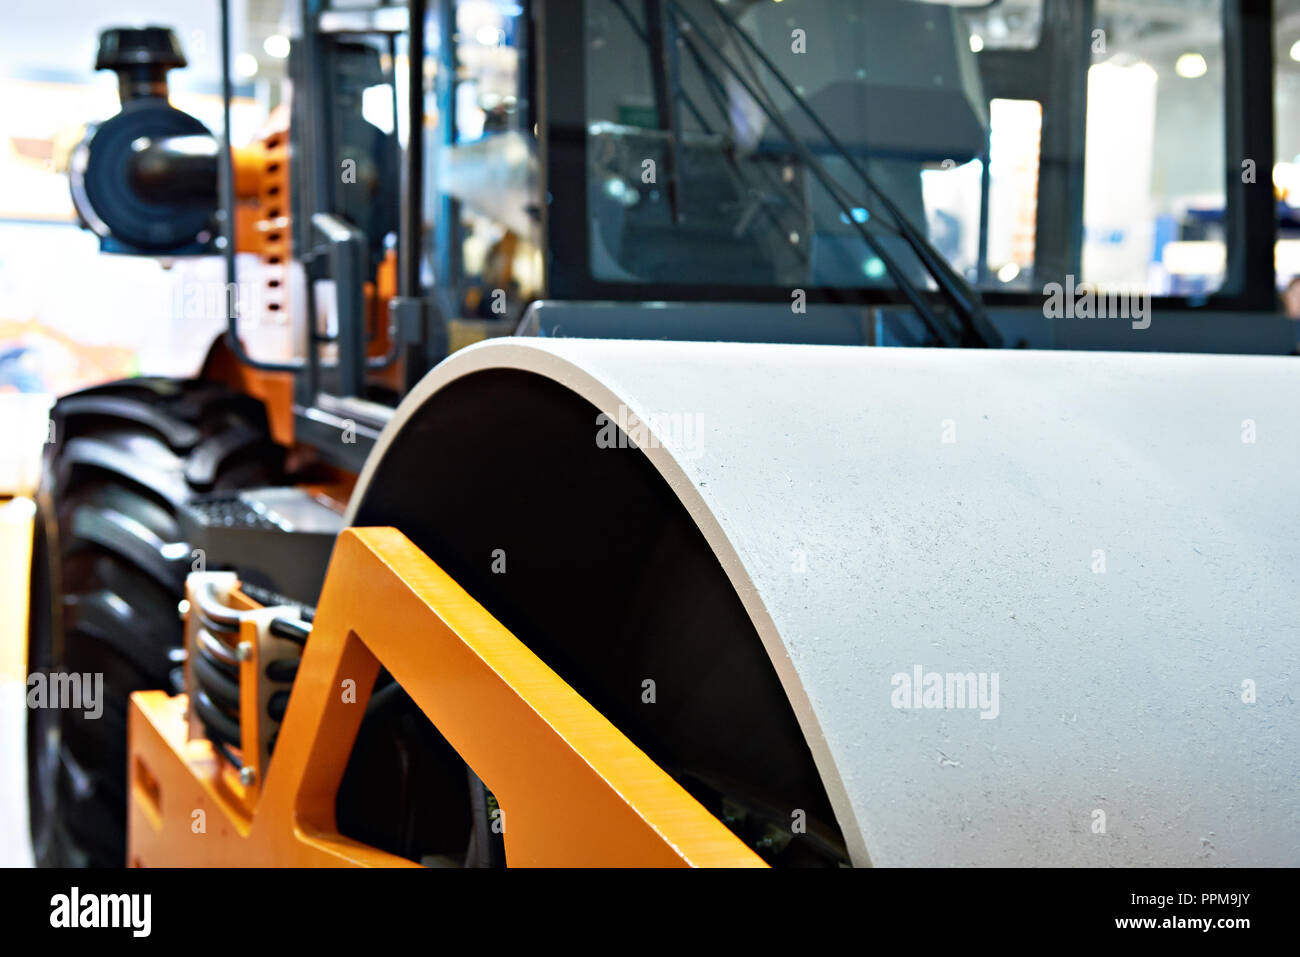 Road roller for construction industry Stock Photo